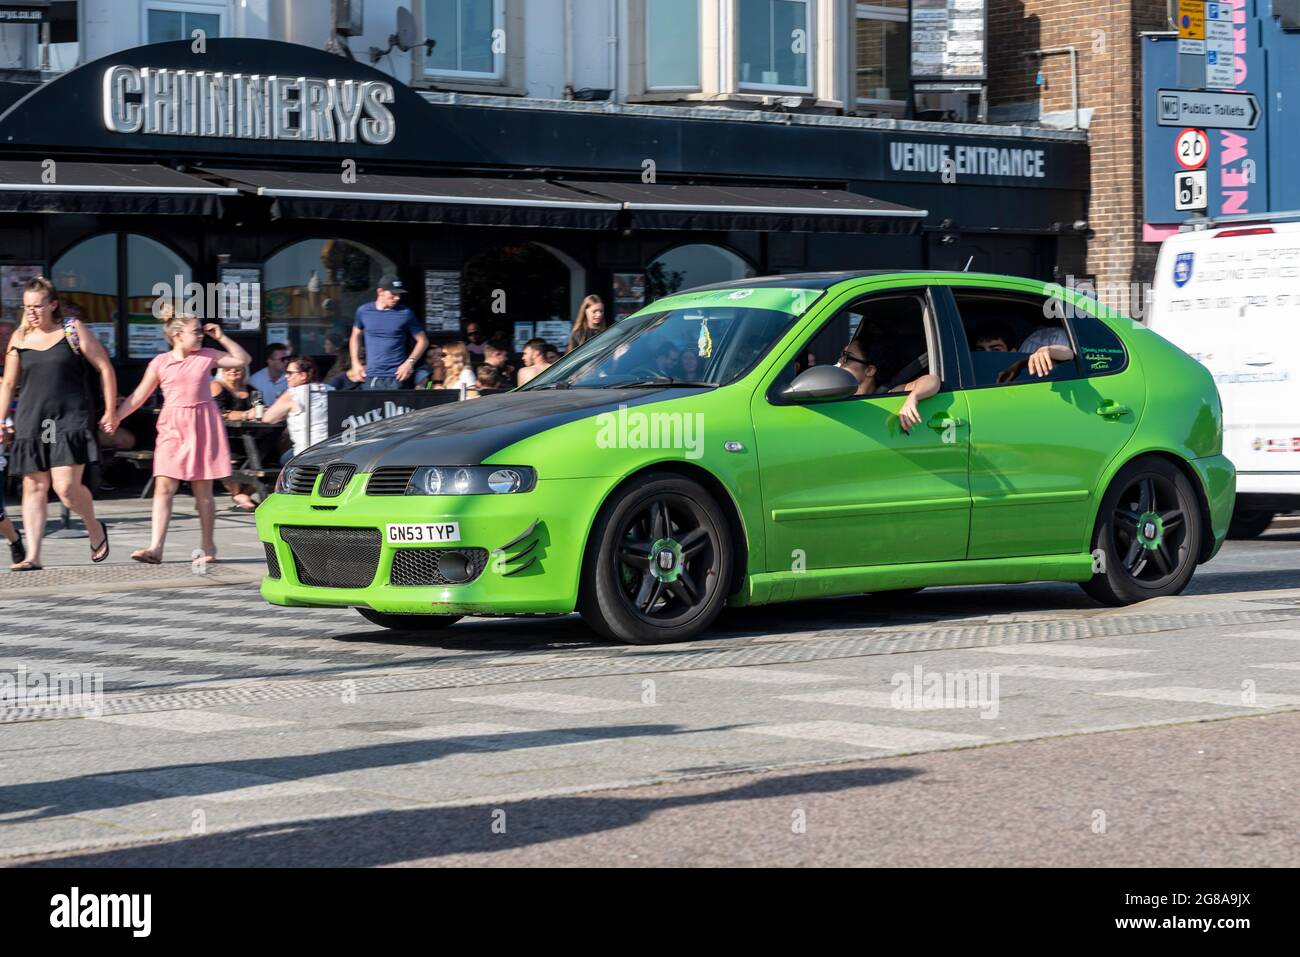 SEAT Leon custom car driving past cafes and amusement arcades on Marine Parade, Southend on Sea, Essex, UK. Lowered, modified. Teens cruising Stock Photo